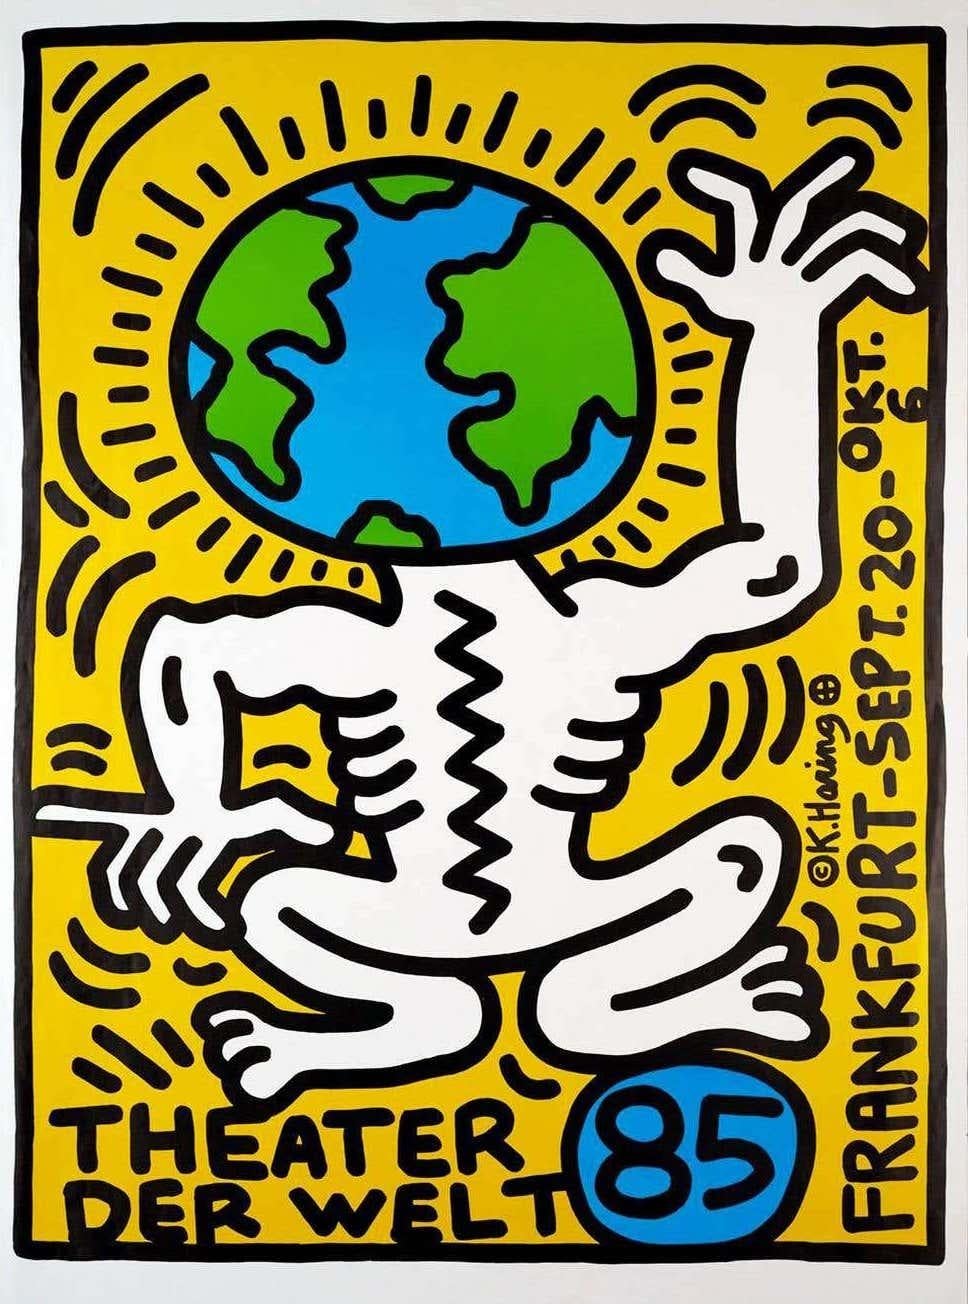 Keith Haring, Theater der Welt Lithograph, Frankfurt, Germany 1985:
Original 1st printing produced during Haring's lifetime. Bold, stand-out colors that make for brilliant, largely sized Keith Haring wall art within reach. 

Silkscreen in black,